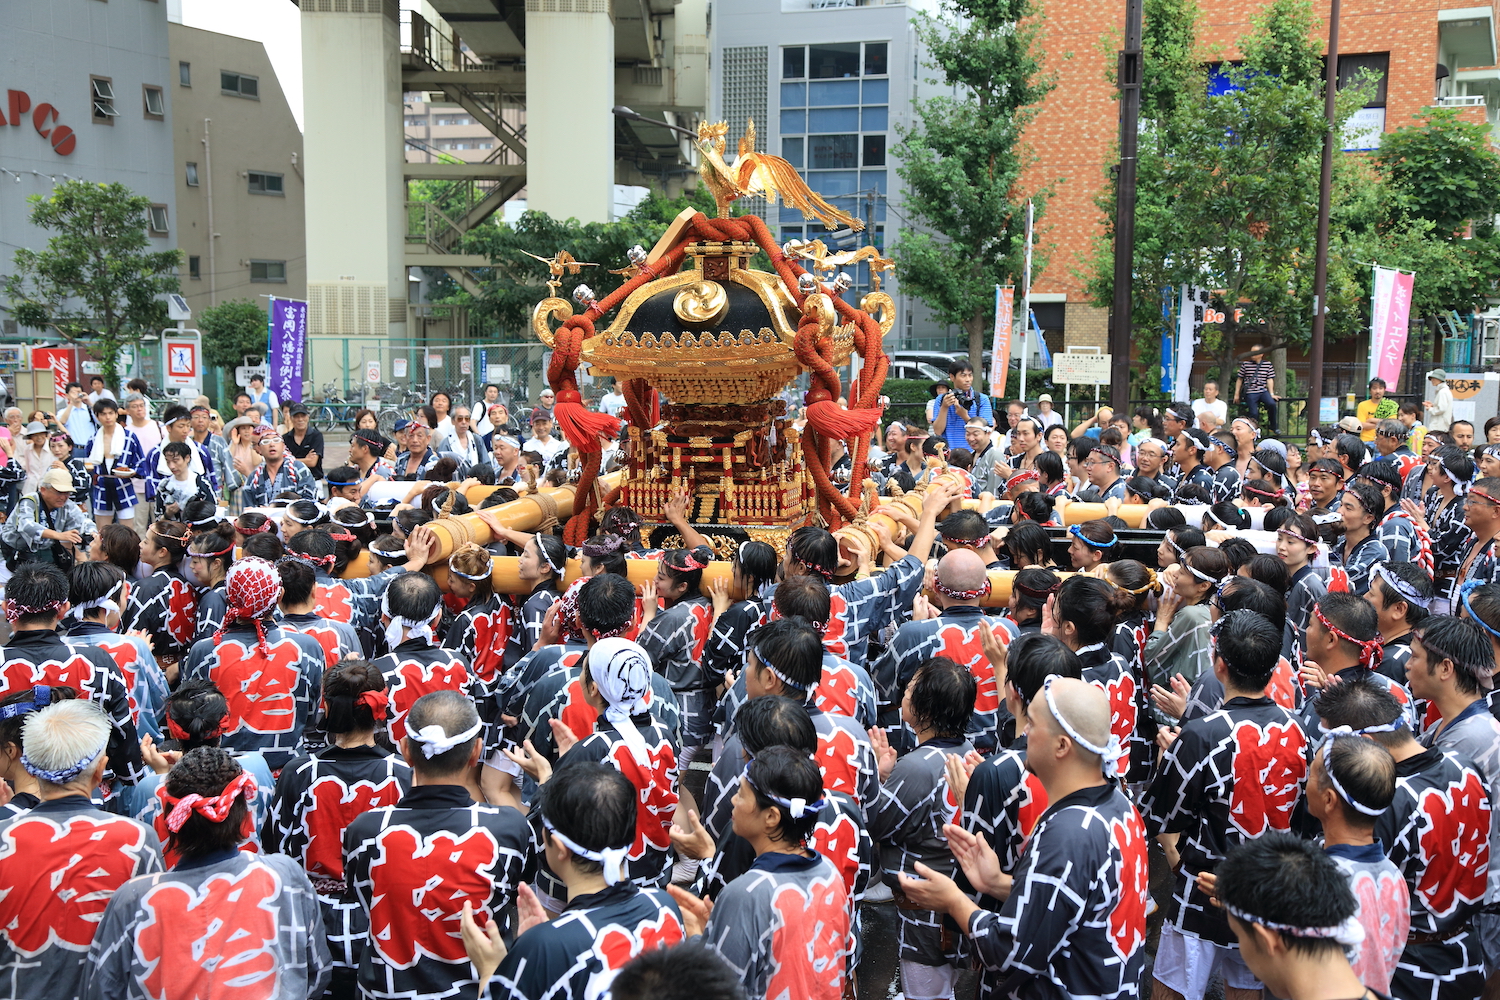 Tokyo, Japan - August 12, 2012 "Fukagawa Hachimangu Matsuri", held every three years in mid-August. More than 54 mikoshi parades and purifying water splashed on spectators by parade participants.